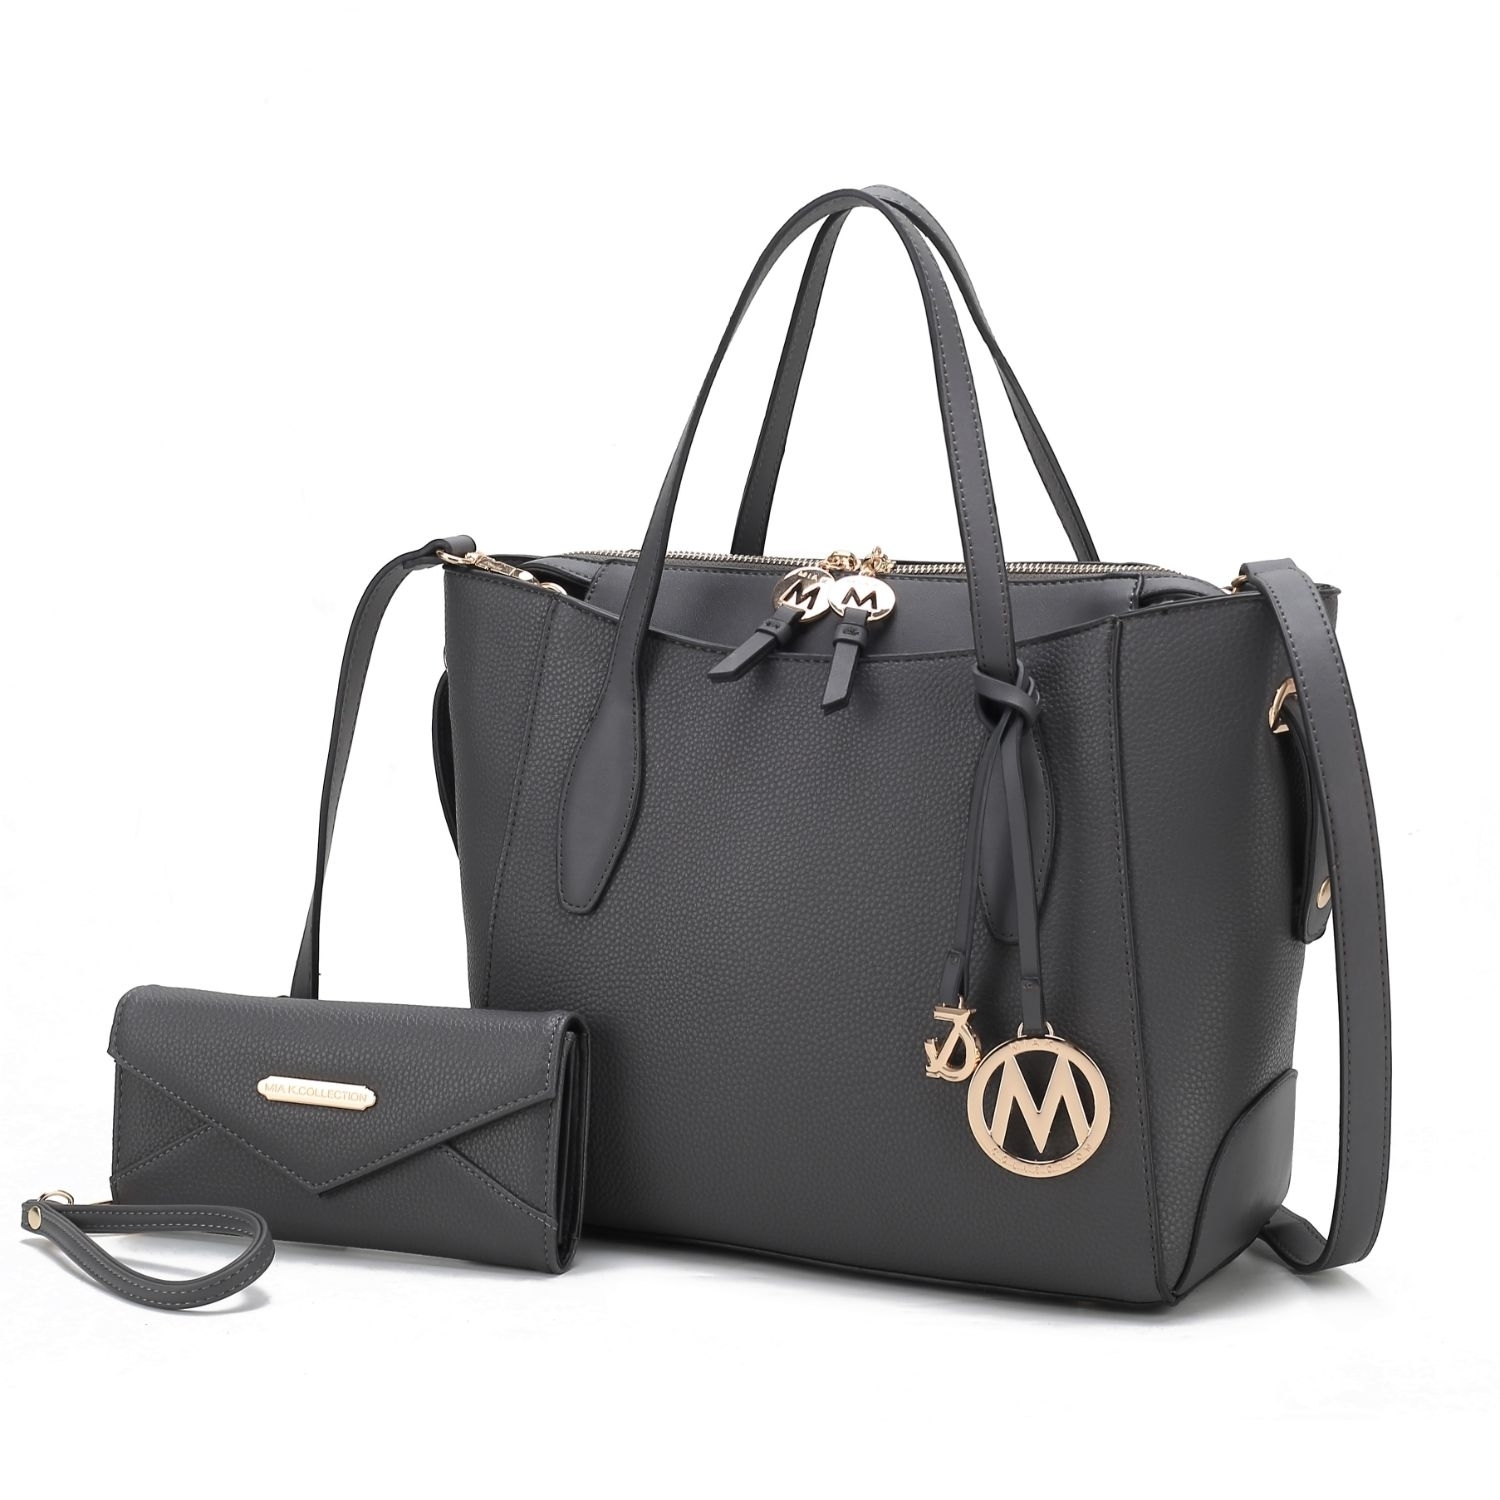 MKF Collection Bruna Vegan Leather Women's Tote Bag With Wallet -2 Pieces By Mia K - Charcoal